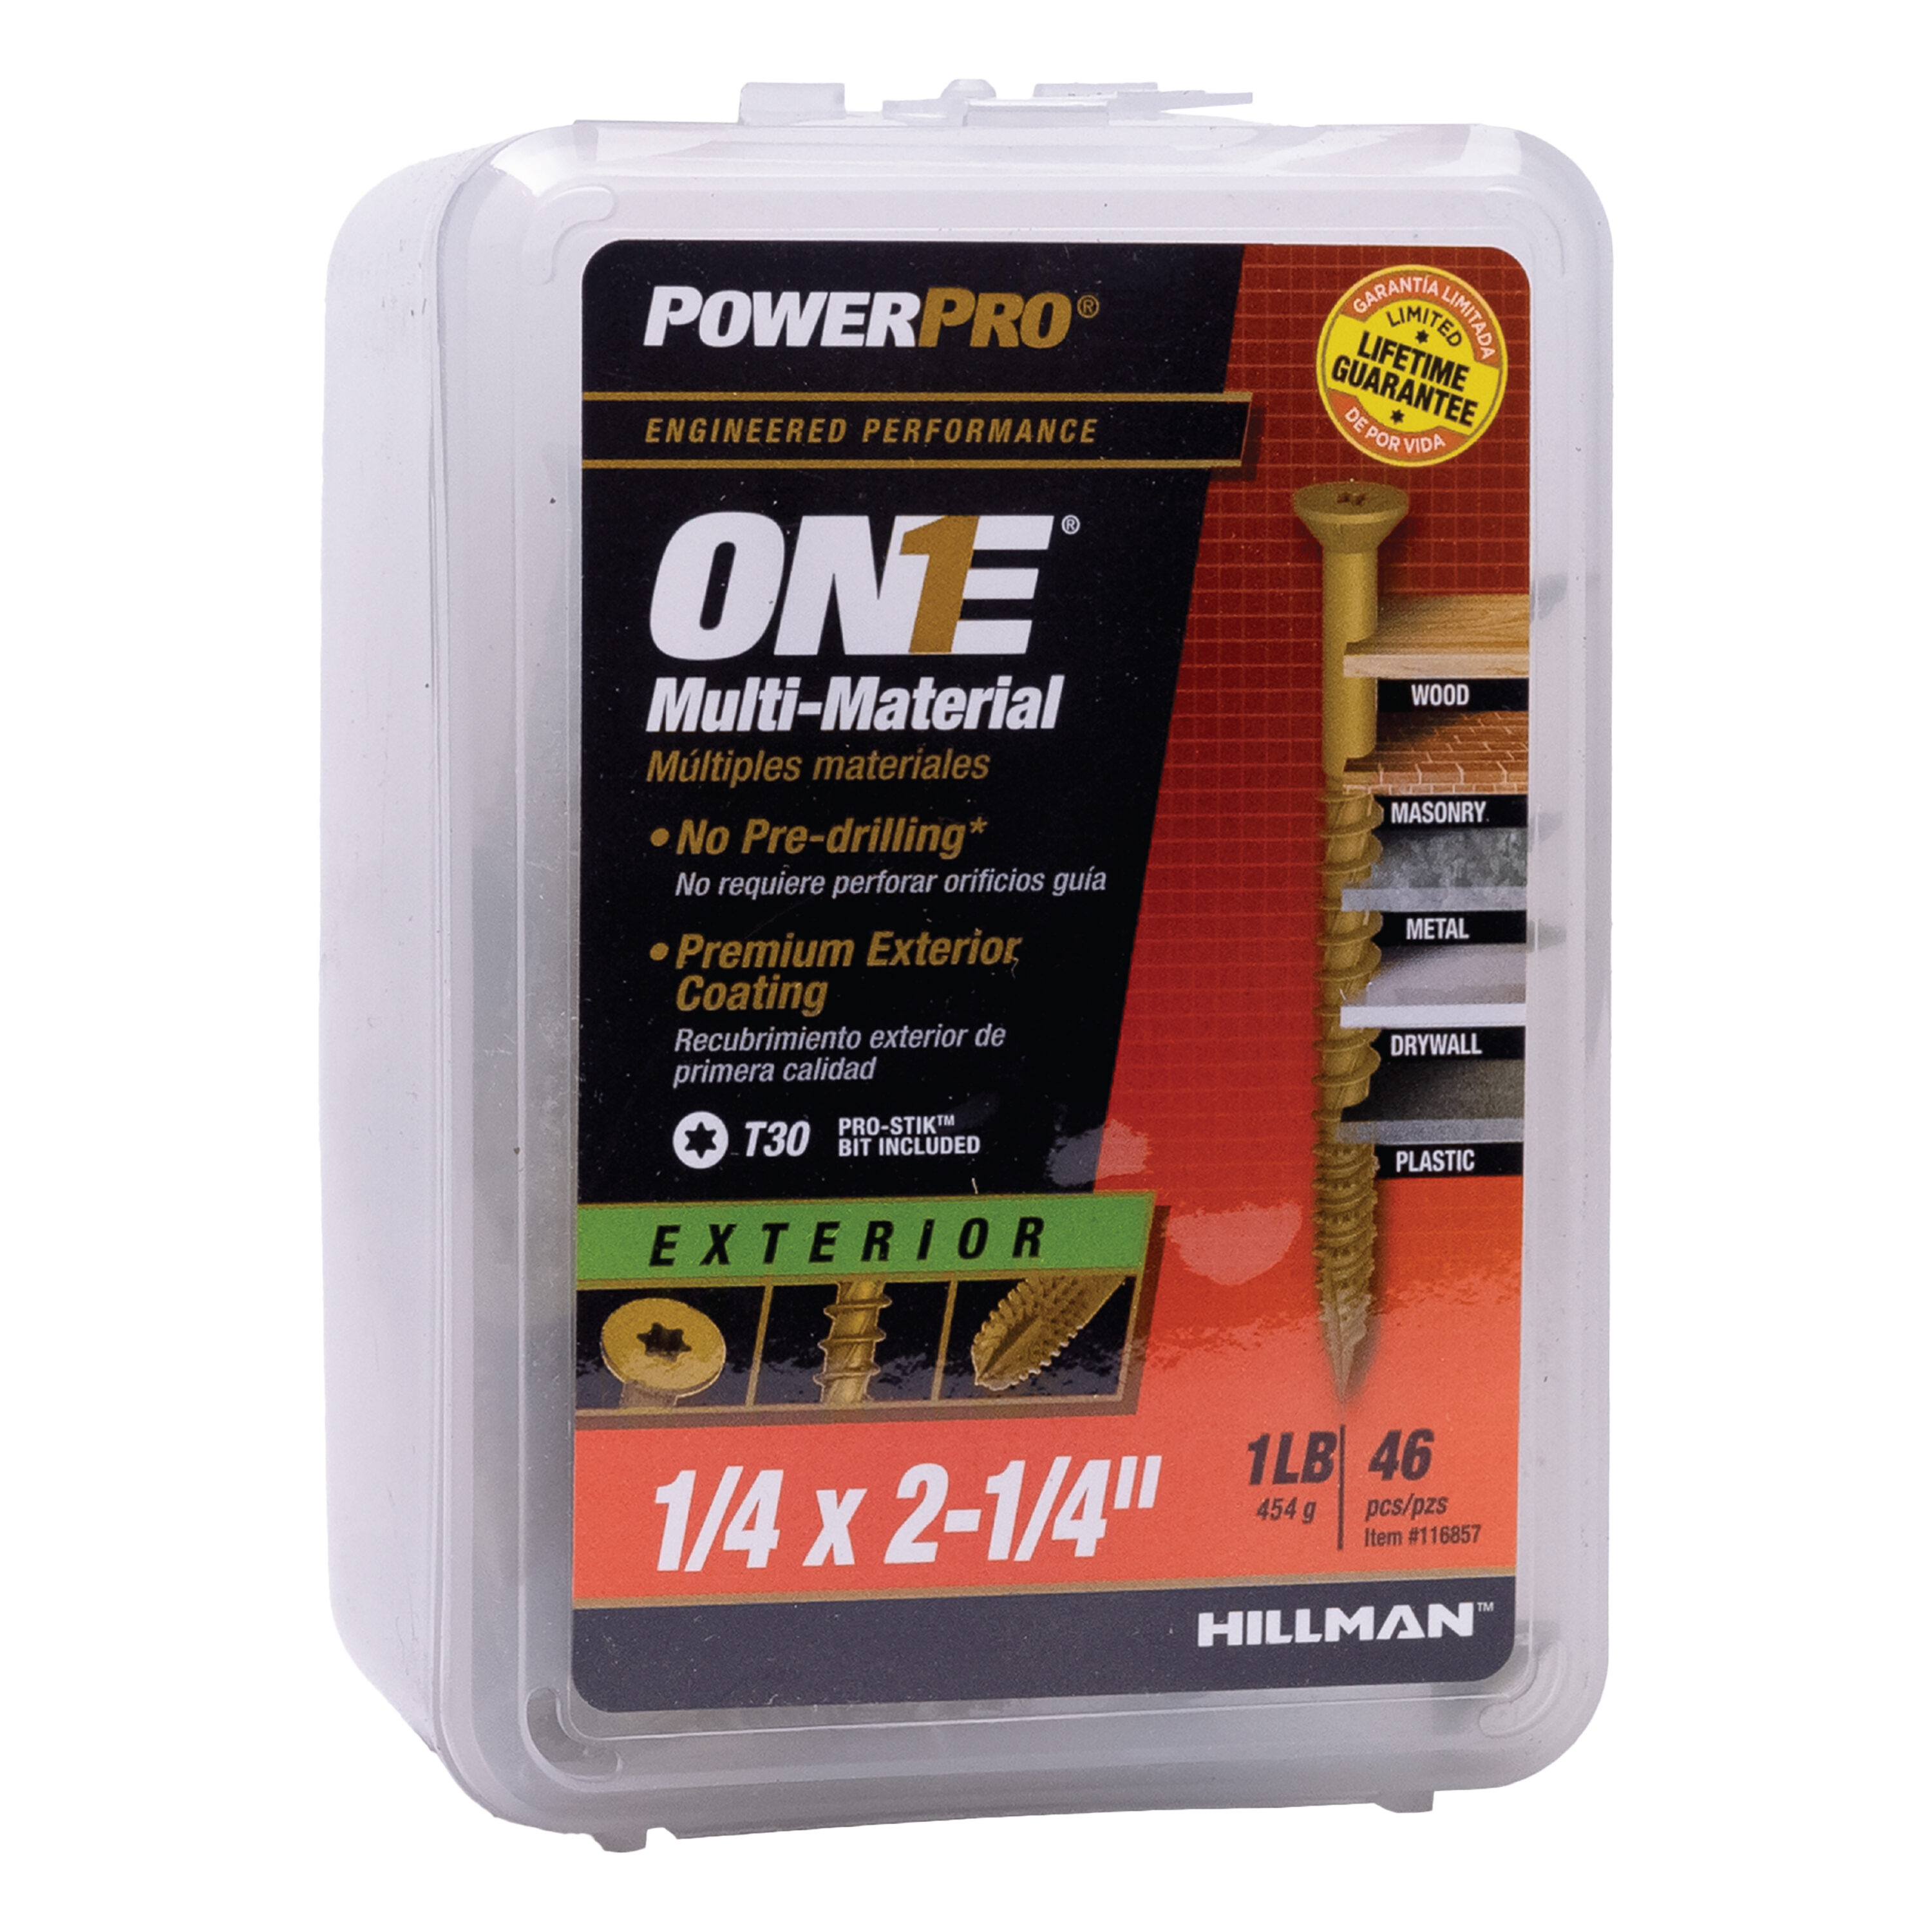 Power Pro 1/4-in x 2-1/4-in Epoxy One Exterior Wood Screws in the